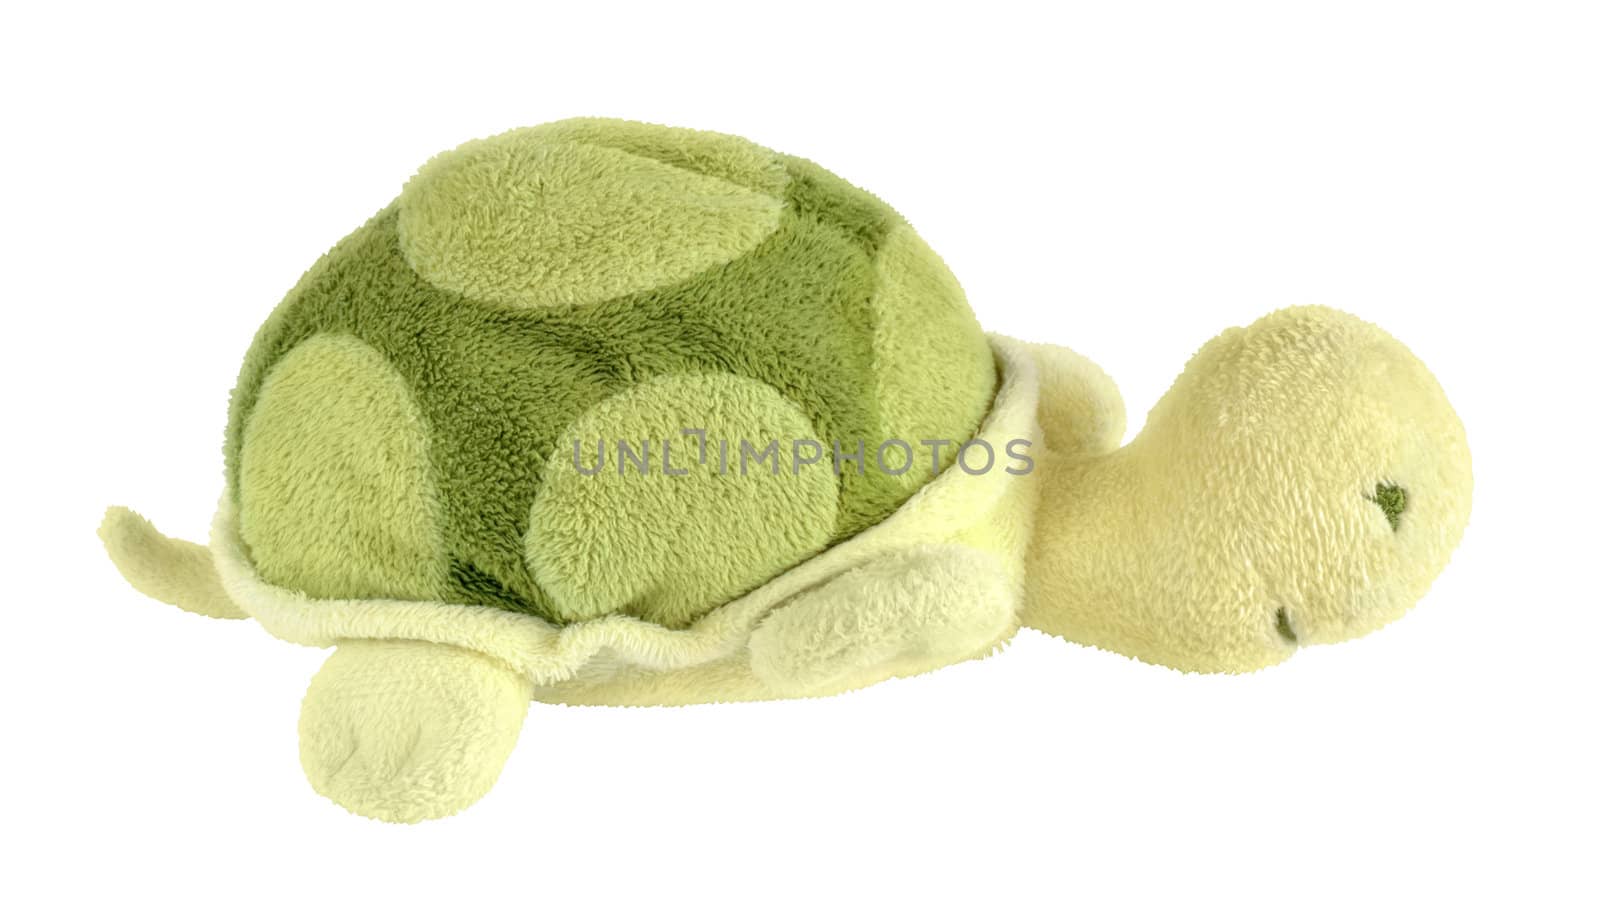 Turtle toy by Vectorex